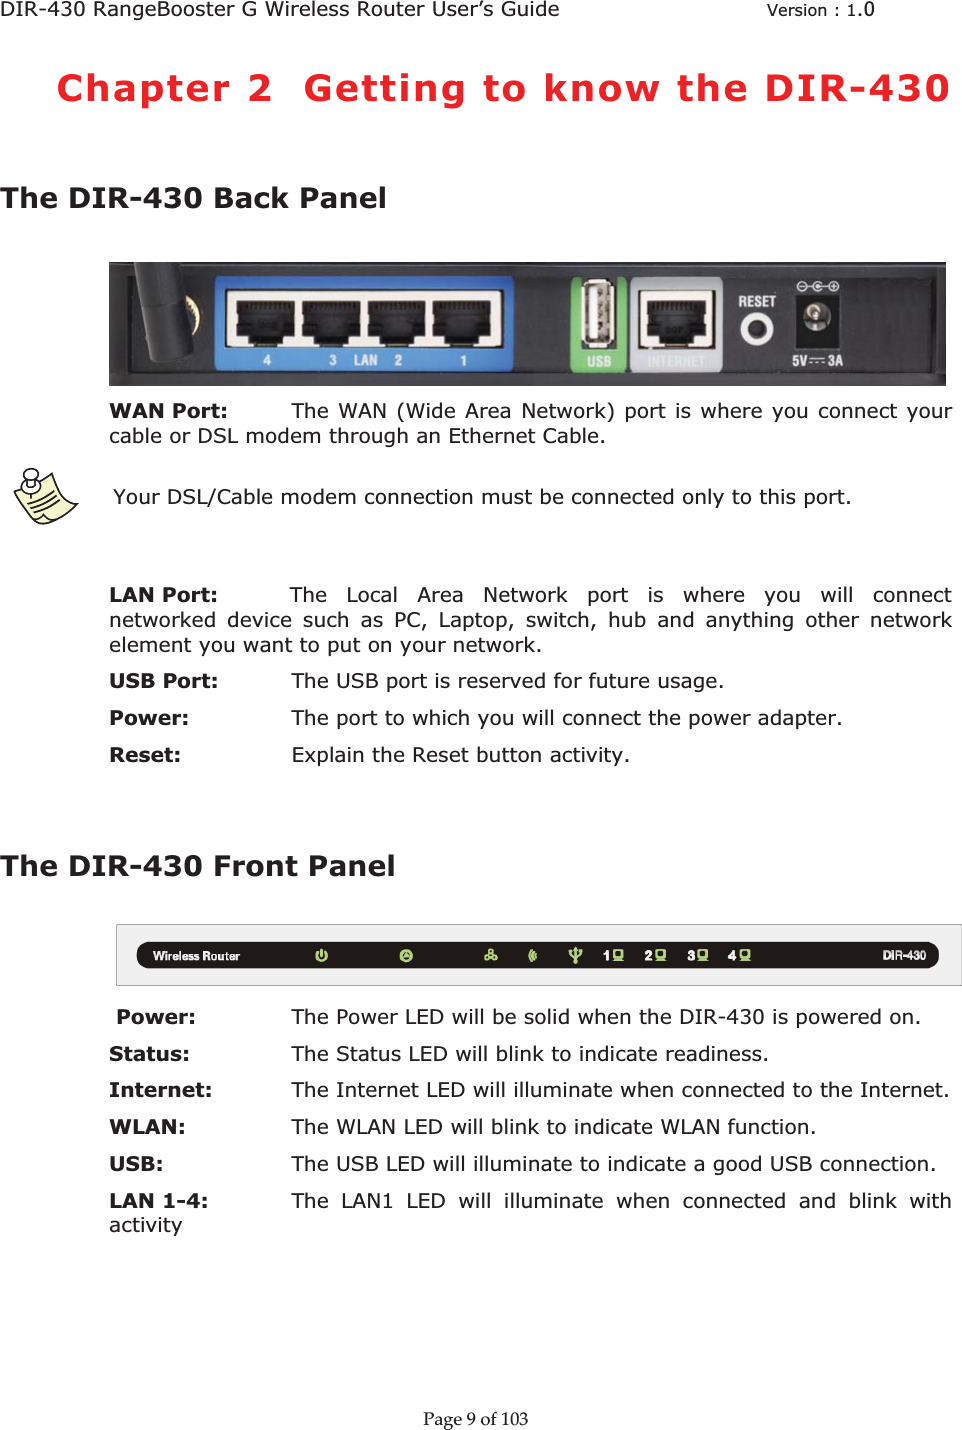 DIR-430 RangeBooster G Wireless Router User’s Guide  Version : 1.0ȱChapter 2  Getting to know the DIR-430The DIR-430 Back Panel WAN Port:  The WAN (Wide Area Network) port is where you connect your cable or DSL modem through an Ethernet Cable. ȱYour DSL/Cable modem connection must be connected only to this port. LAN Port:          The Local Area Network port is where you will connect networked device such as PC, Laptop, switch, hub and anything other network element you want to put on your network. USB Port:  The USB port is reserved for future usage. Power:     The port to which you will connect the power adapter. Reset:    Explain the Reset button activity. The DIR-430 Front Panel  Power:    The Power LED will be solid when the DIR-430 is powered on. Status:   The Status LED will blink to indicate readiness. Internet: The Internet LED will illuminate when connected to the Internet. WLAN: The WLAN LED will blink to indicate WLAN function. USB:   The USB LED will illuminate to indicate a good USB connection. LAN 1-4:    The LAN1 LED will illuminate when connected and blink with activity Pageȱ9ȱofȱ103ȱ